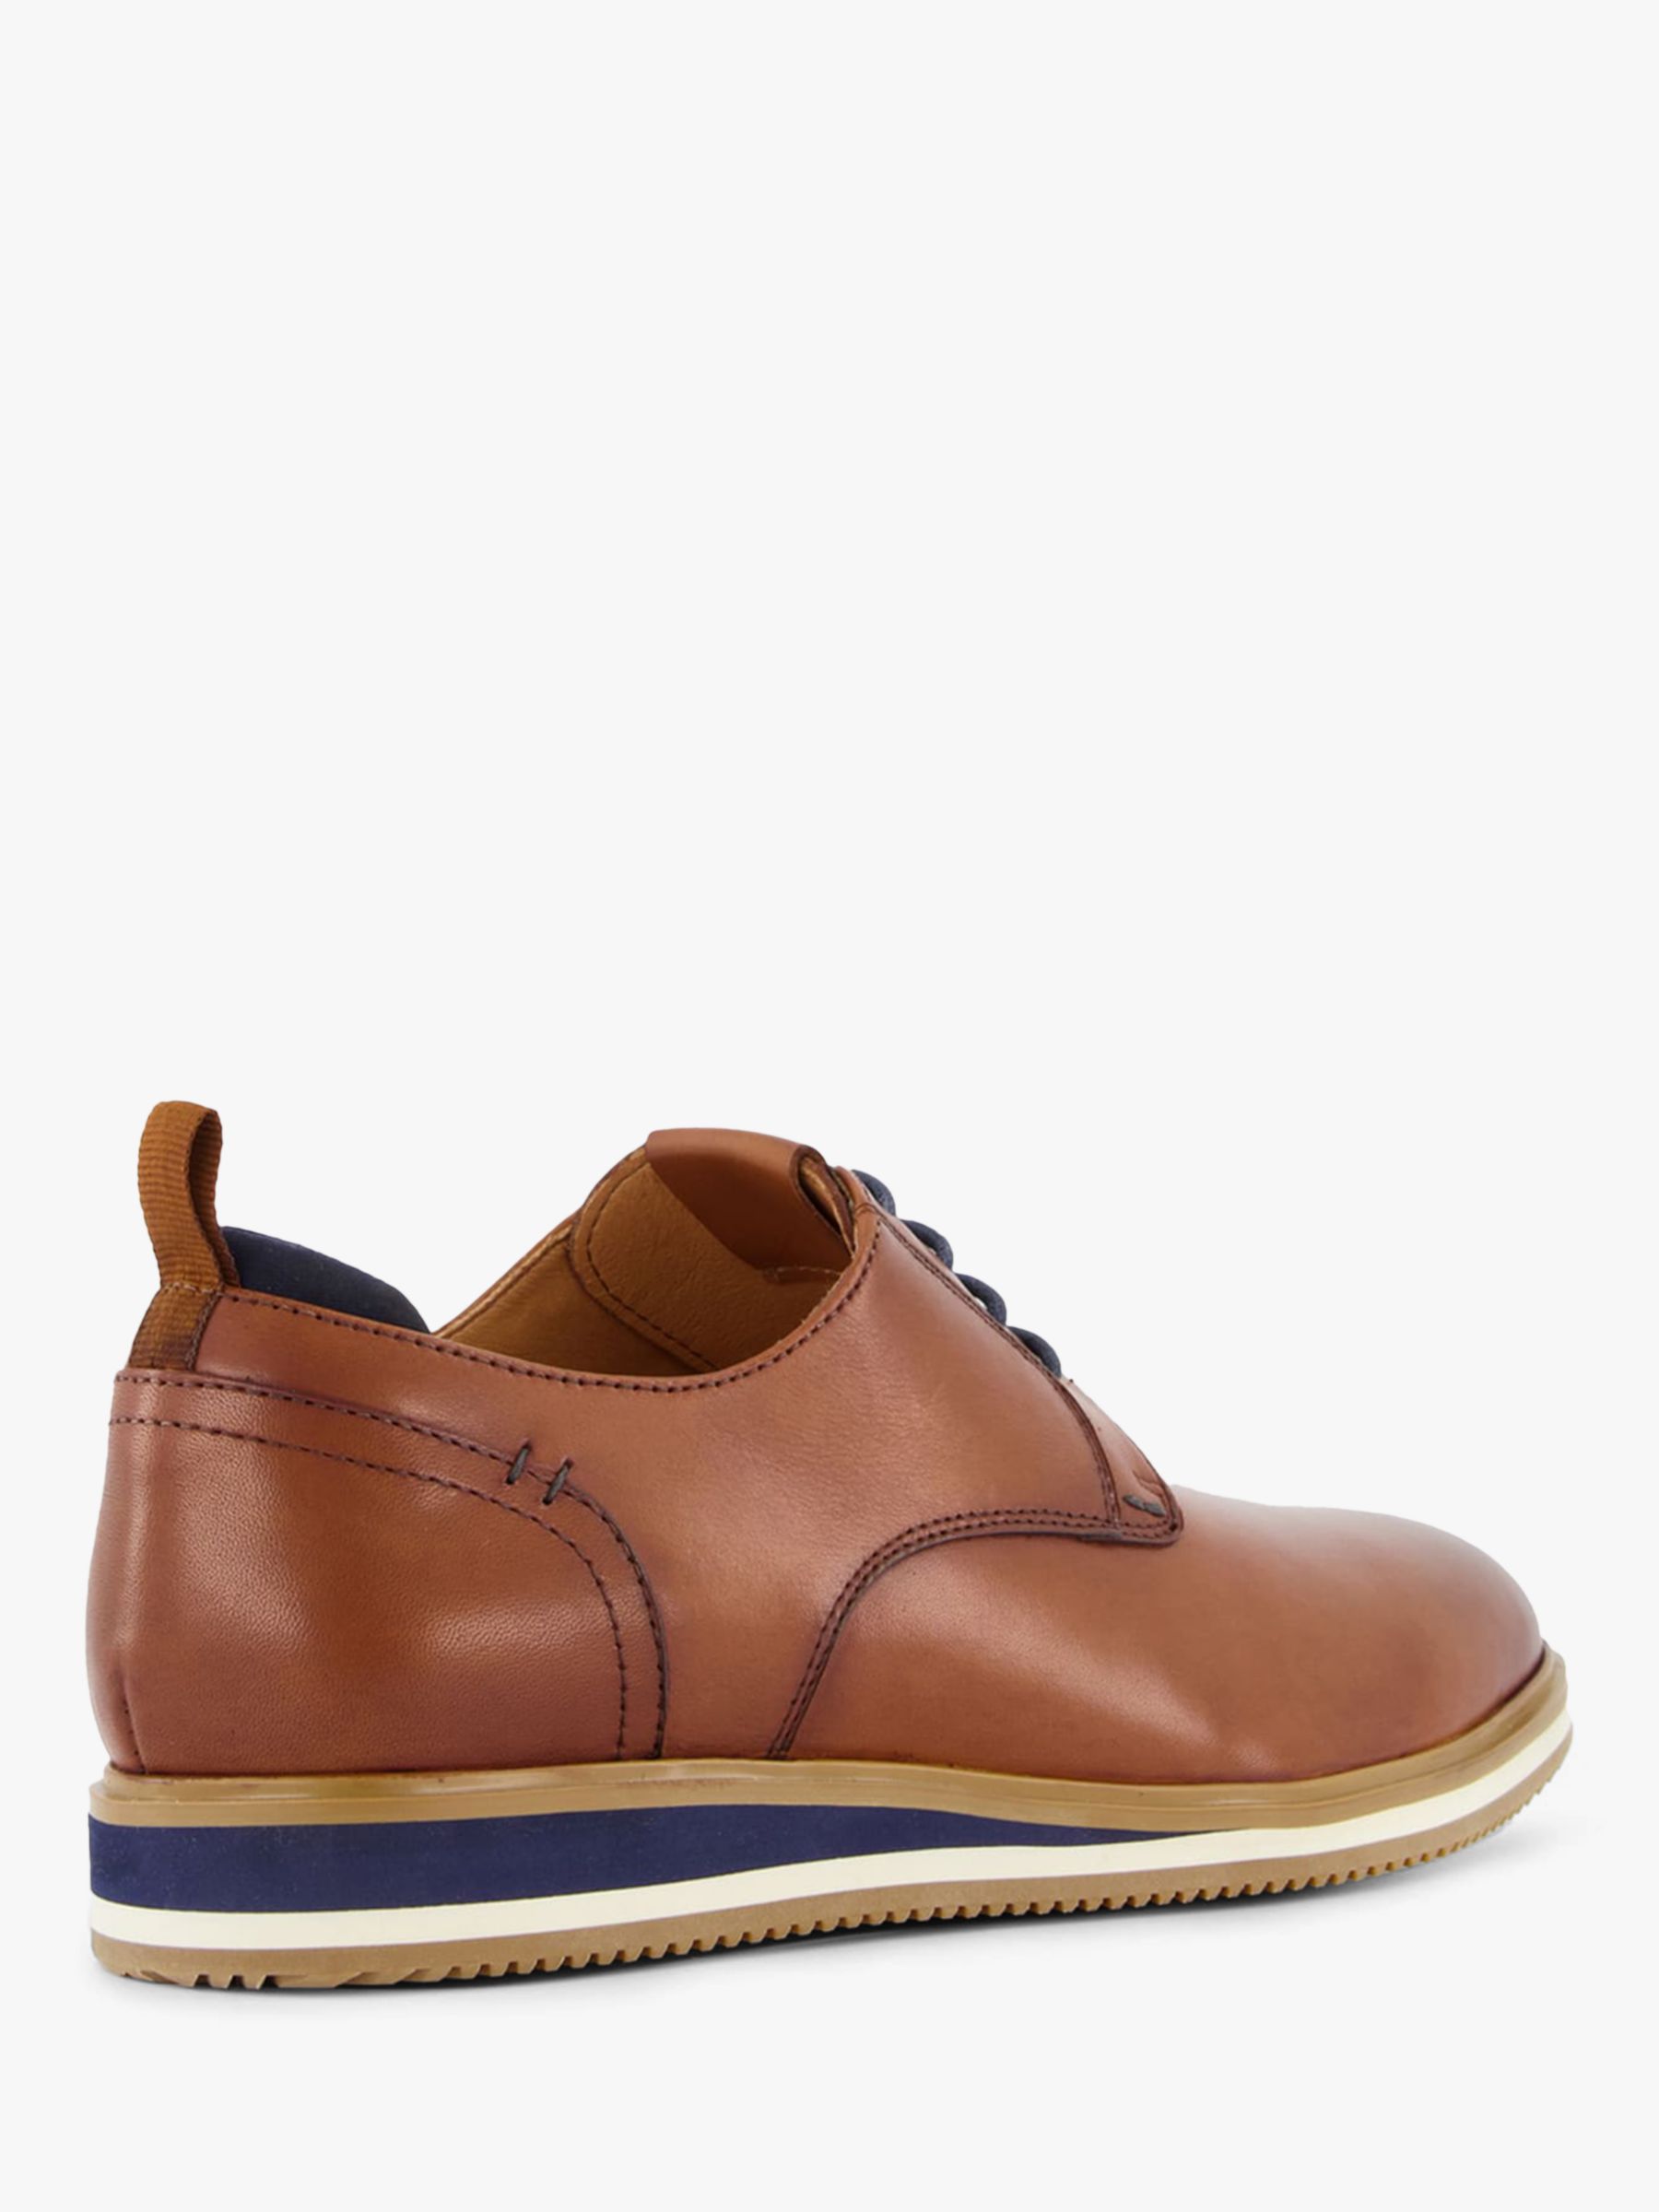 Dune Bucatini Leather Wedge Sole Lace Up Shoes, Tan at John Lewis ...